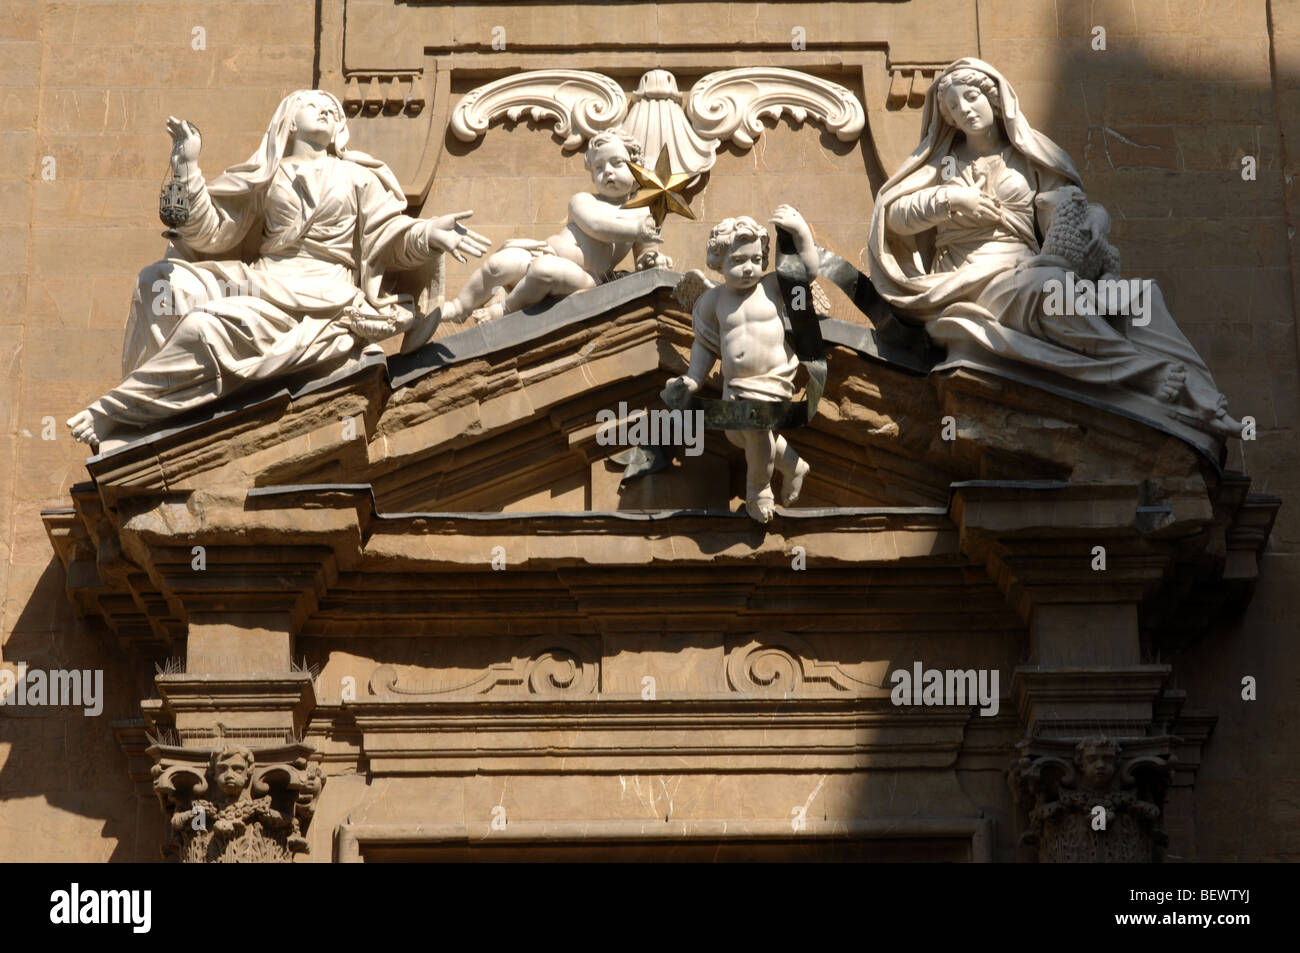 Museo Nazionale Del Bargello, Florence Tuscany, Italy. Stock Photo